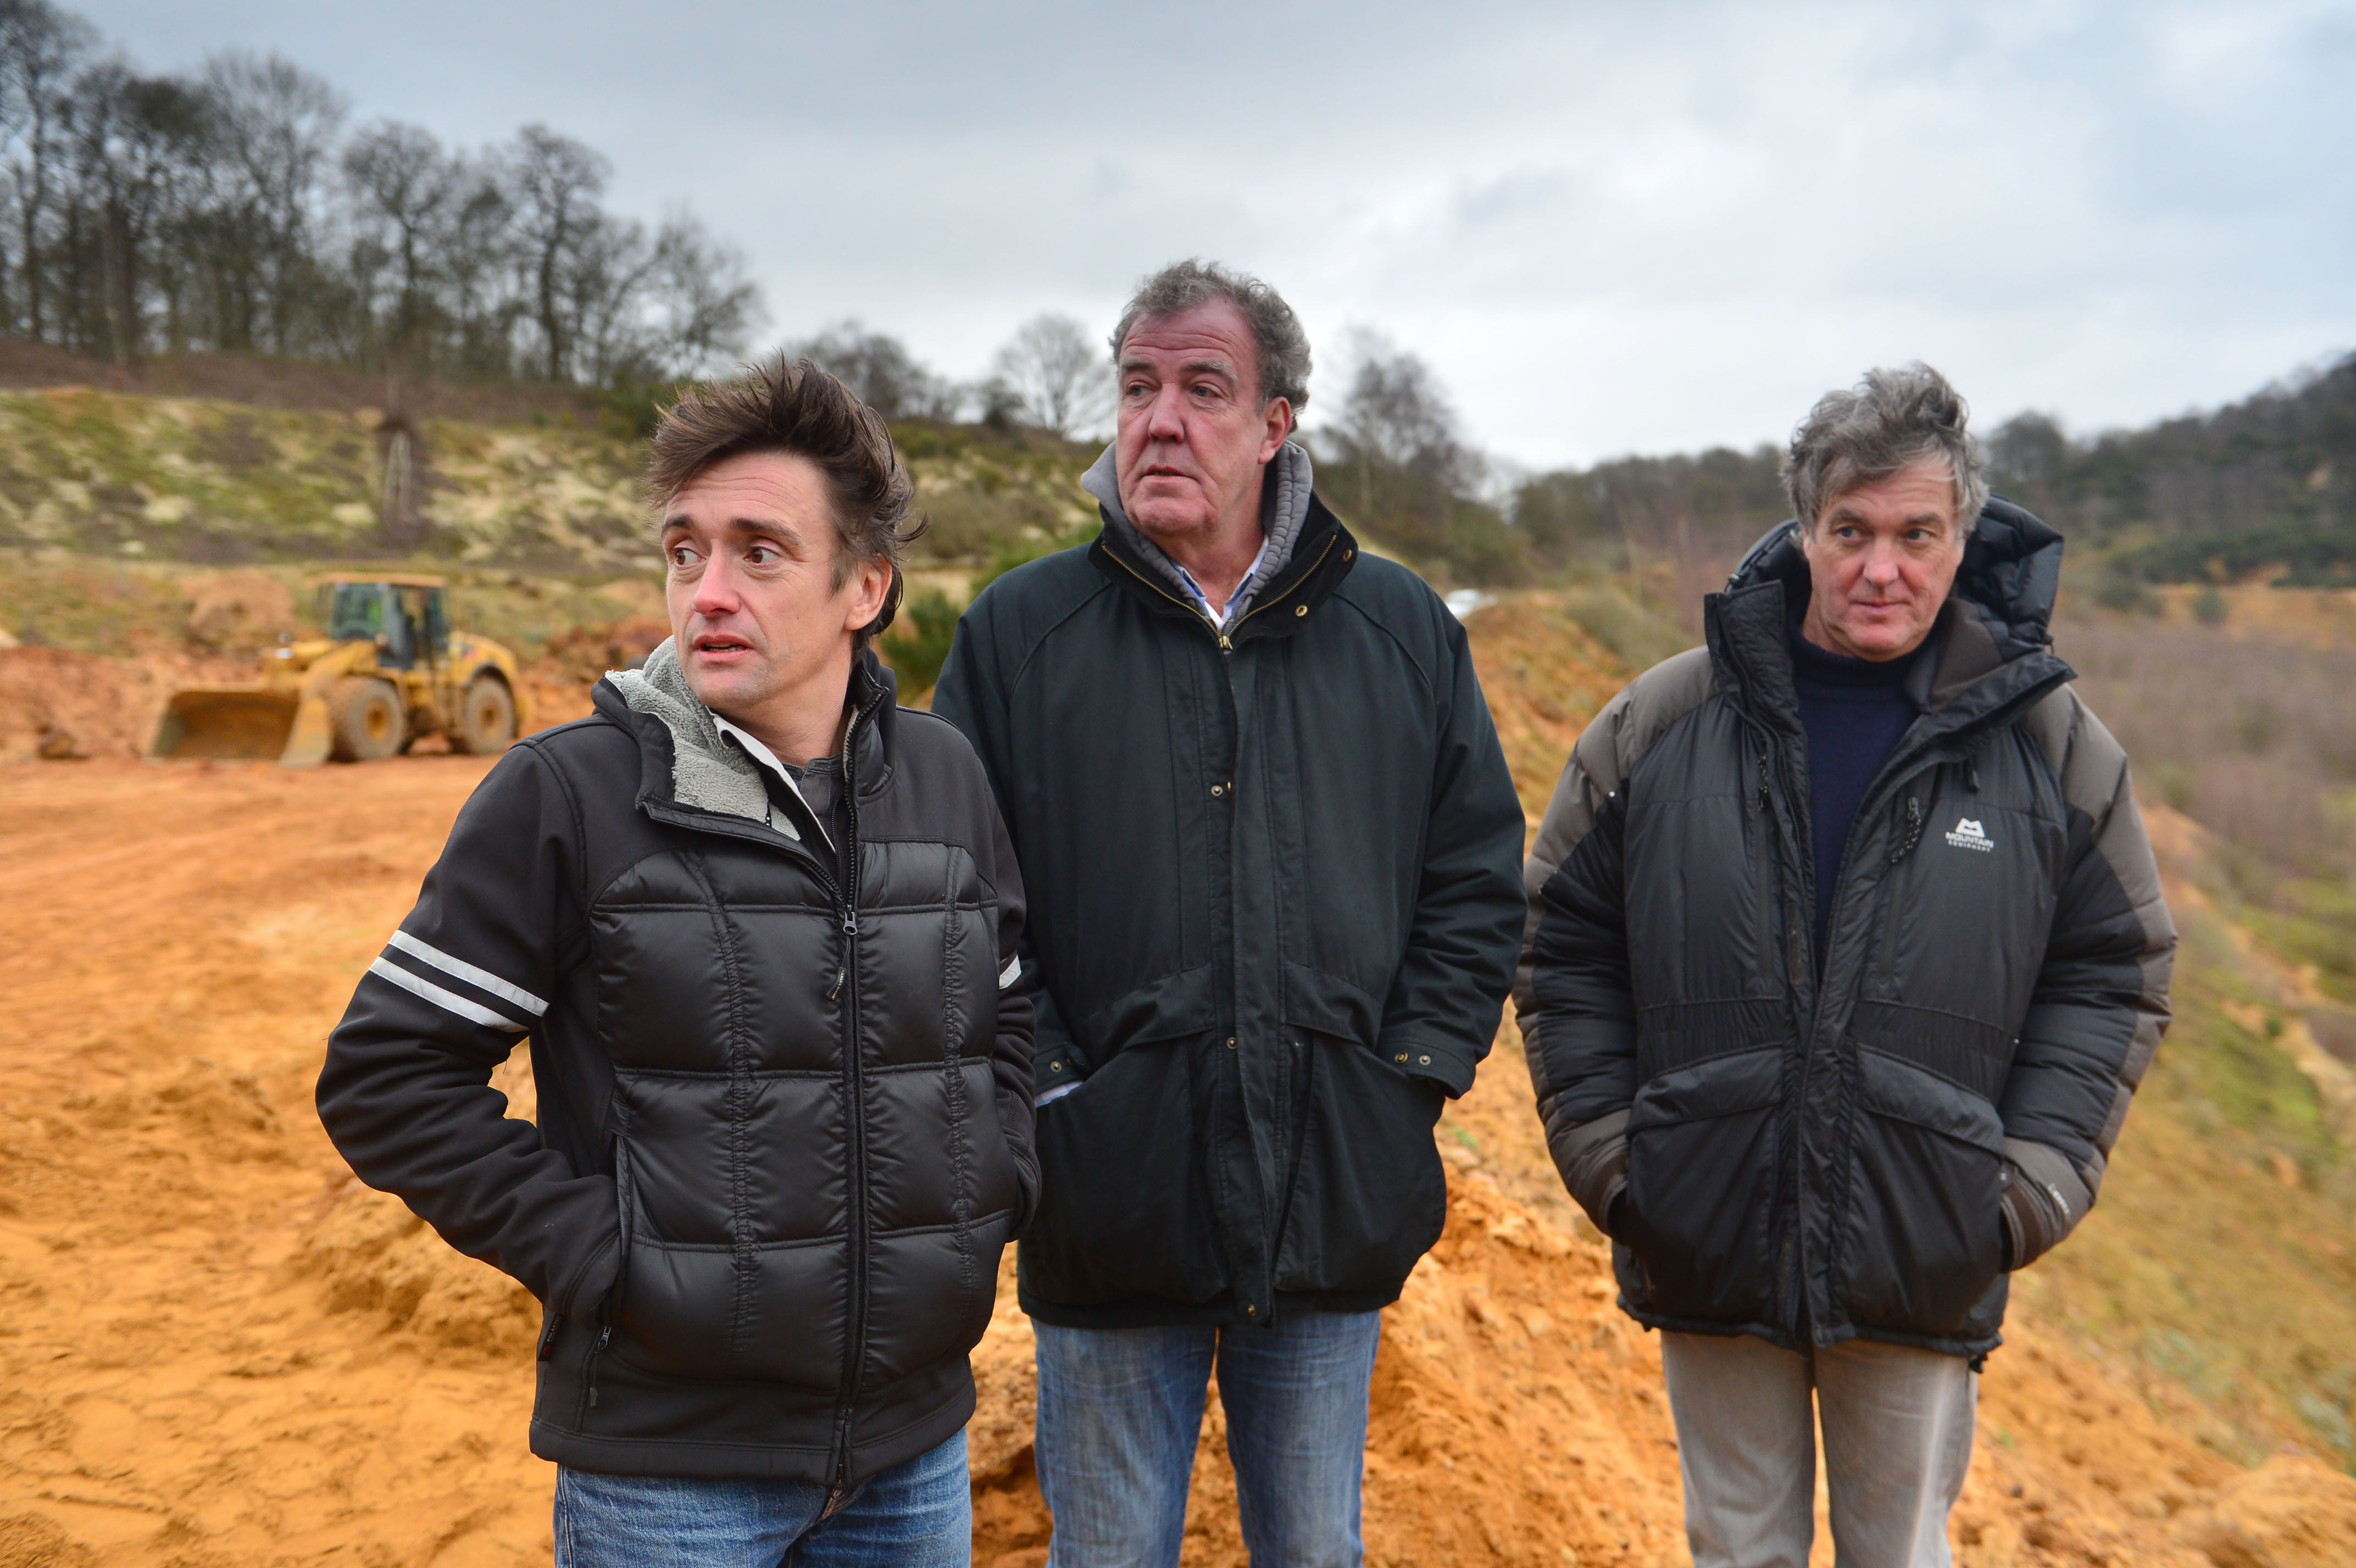 Hammond, Clarkson and May are wrapping up their Amazon Prime show ‘The Grand Tour’ next year